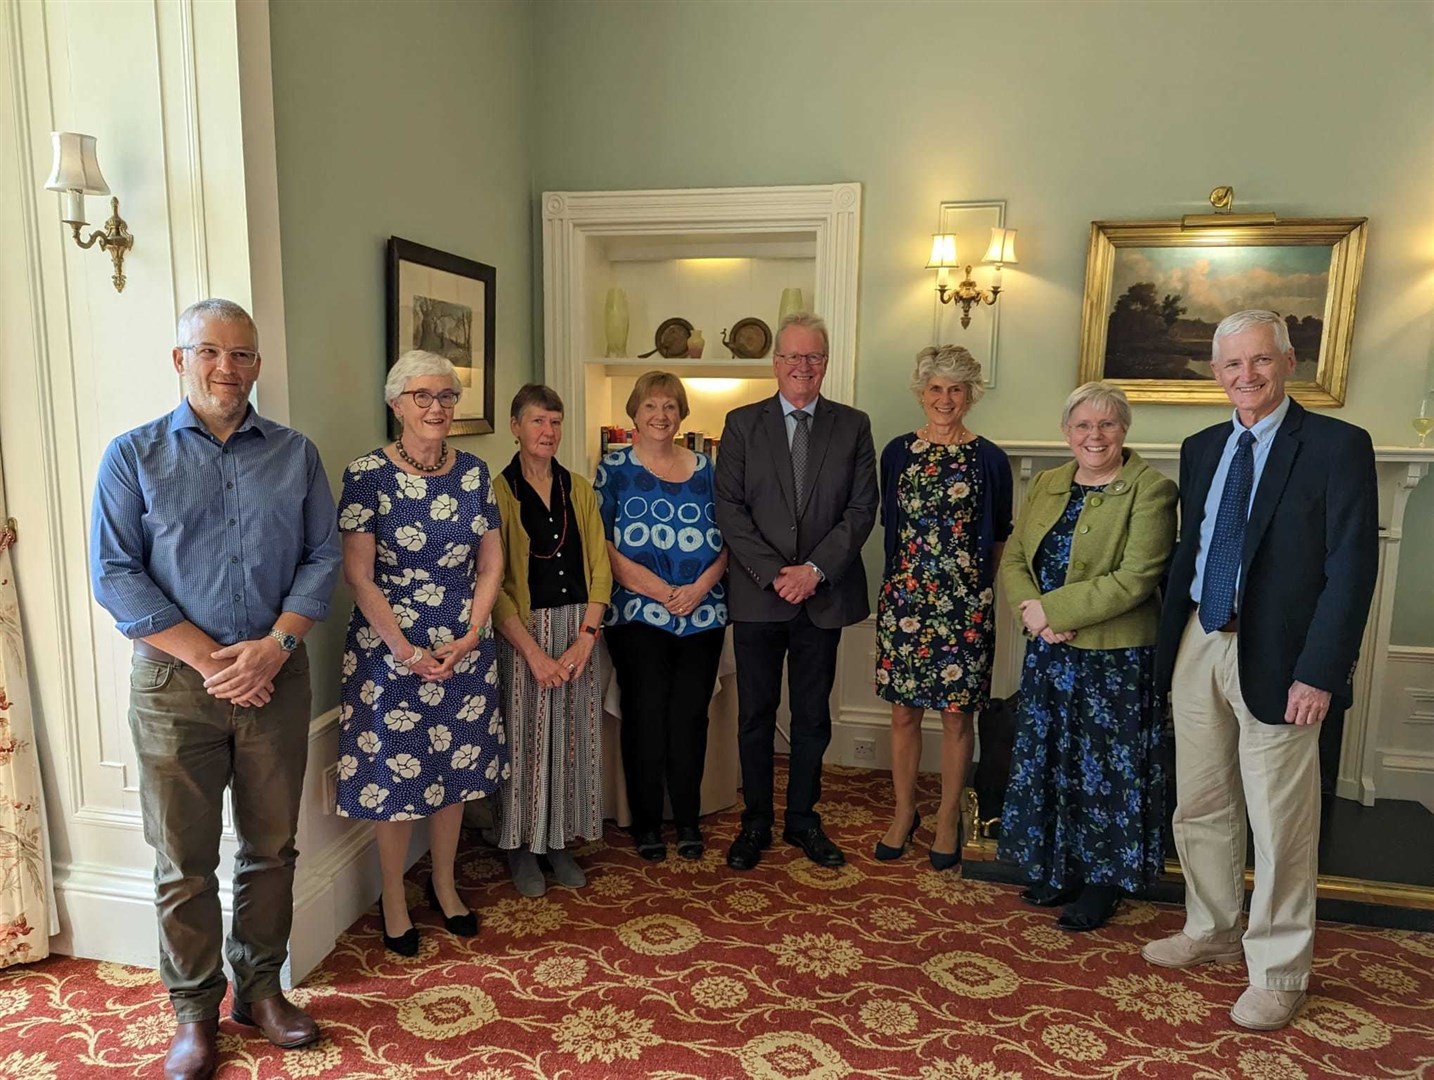 The Lieutenancy Team are pictured (from left): Iain Swayne (Clerk to the Lieutenancy), Joanna Macpherson, Deputy Lieutenant (DL); Jan Dawson (DL), Norma Young (DL), Andy Townsend (Vice-Lord Lieutenant), Joanie Whiteford (Lord Lieutenant), Dr Moira McKenna (DL) and Dr Robbie Bain (DL). Not present were Annie Stewart (DL) and Angus Watson (DL) and Adeline Allan (Assistant Clerk).